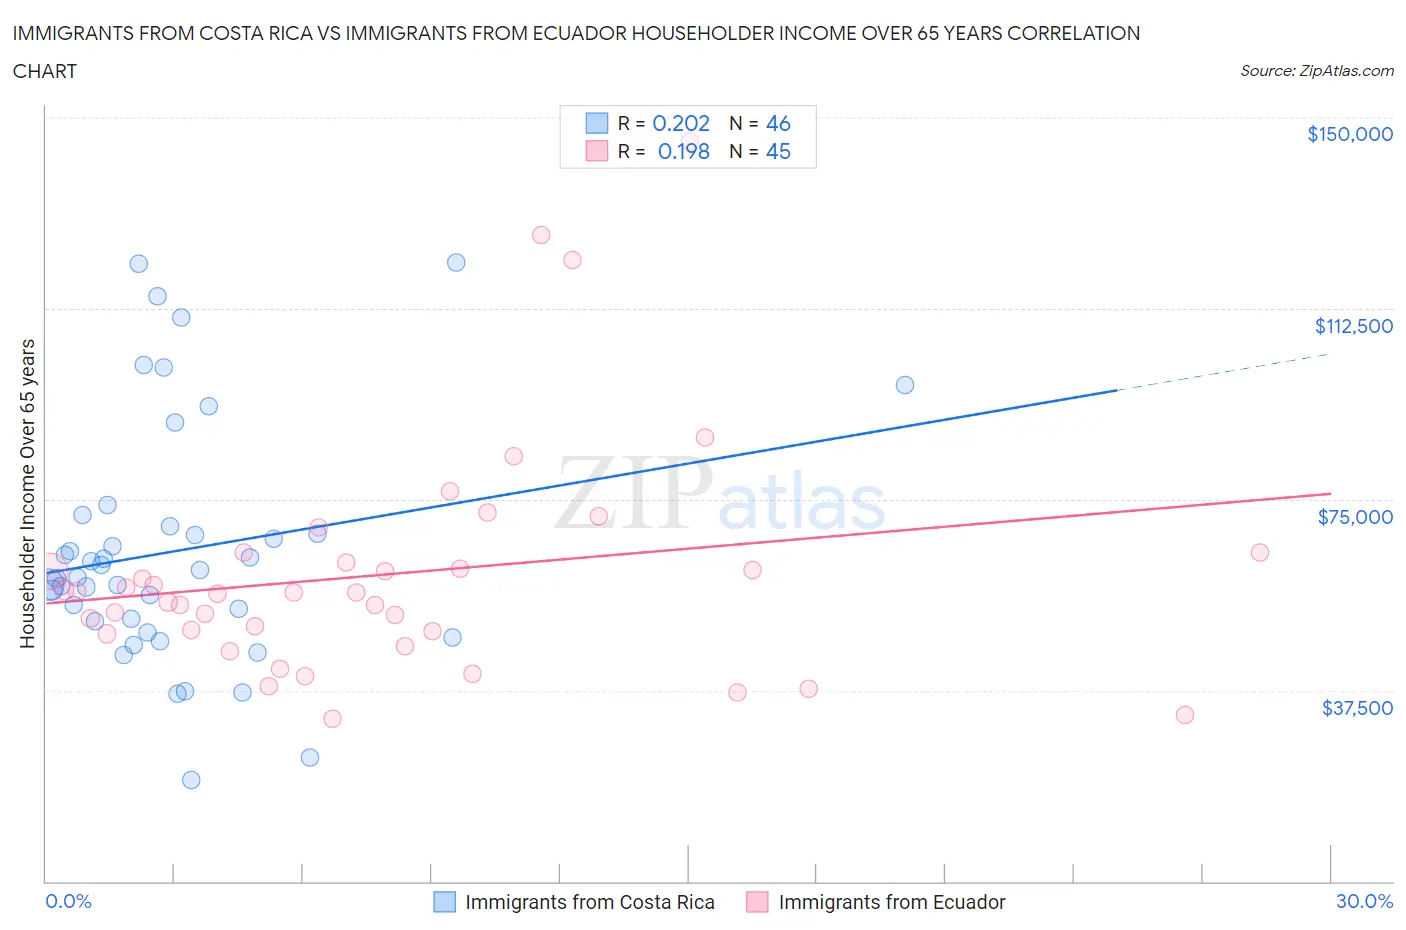 Immigrants from Costa Rica vs Immigrants from Ecuador Householder Income Over 65 years